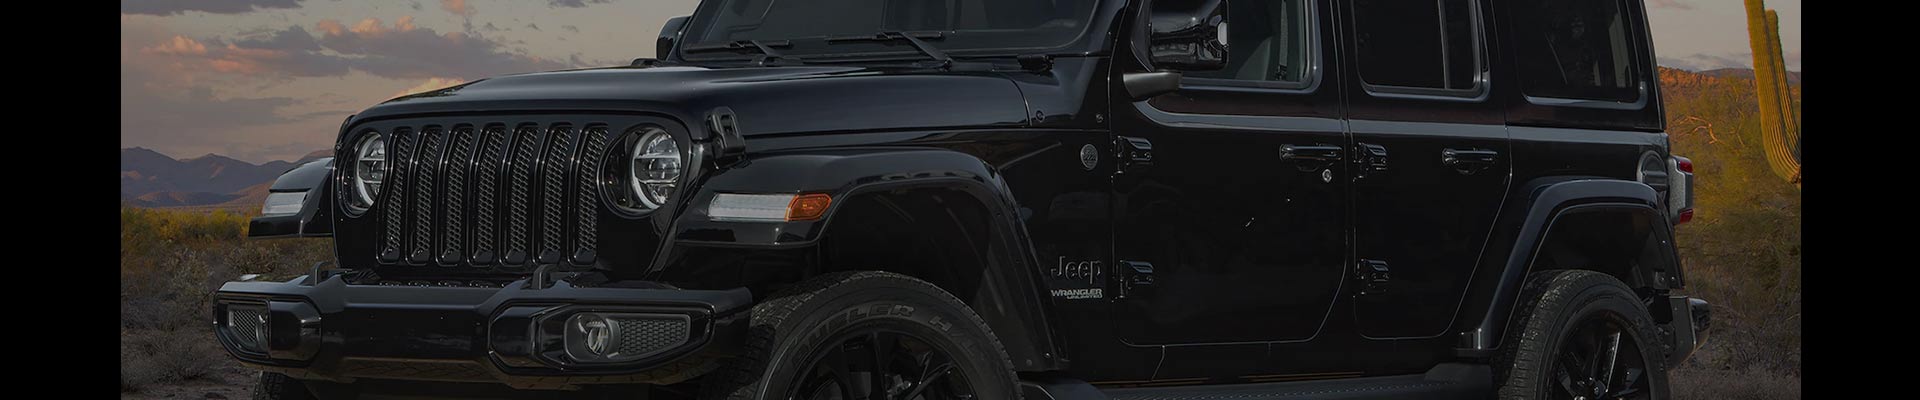 Shop Replacement and OEM 1994 Jeep Wrangler Parts with Discounted Price on the Net